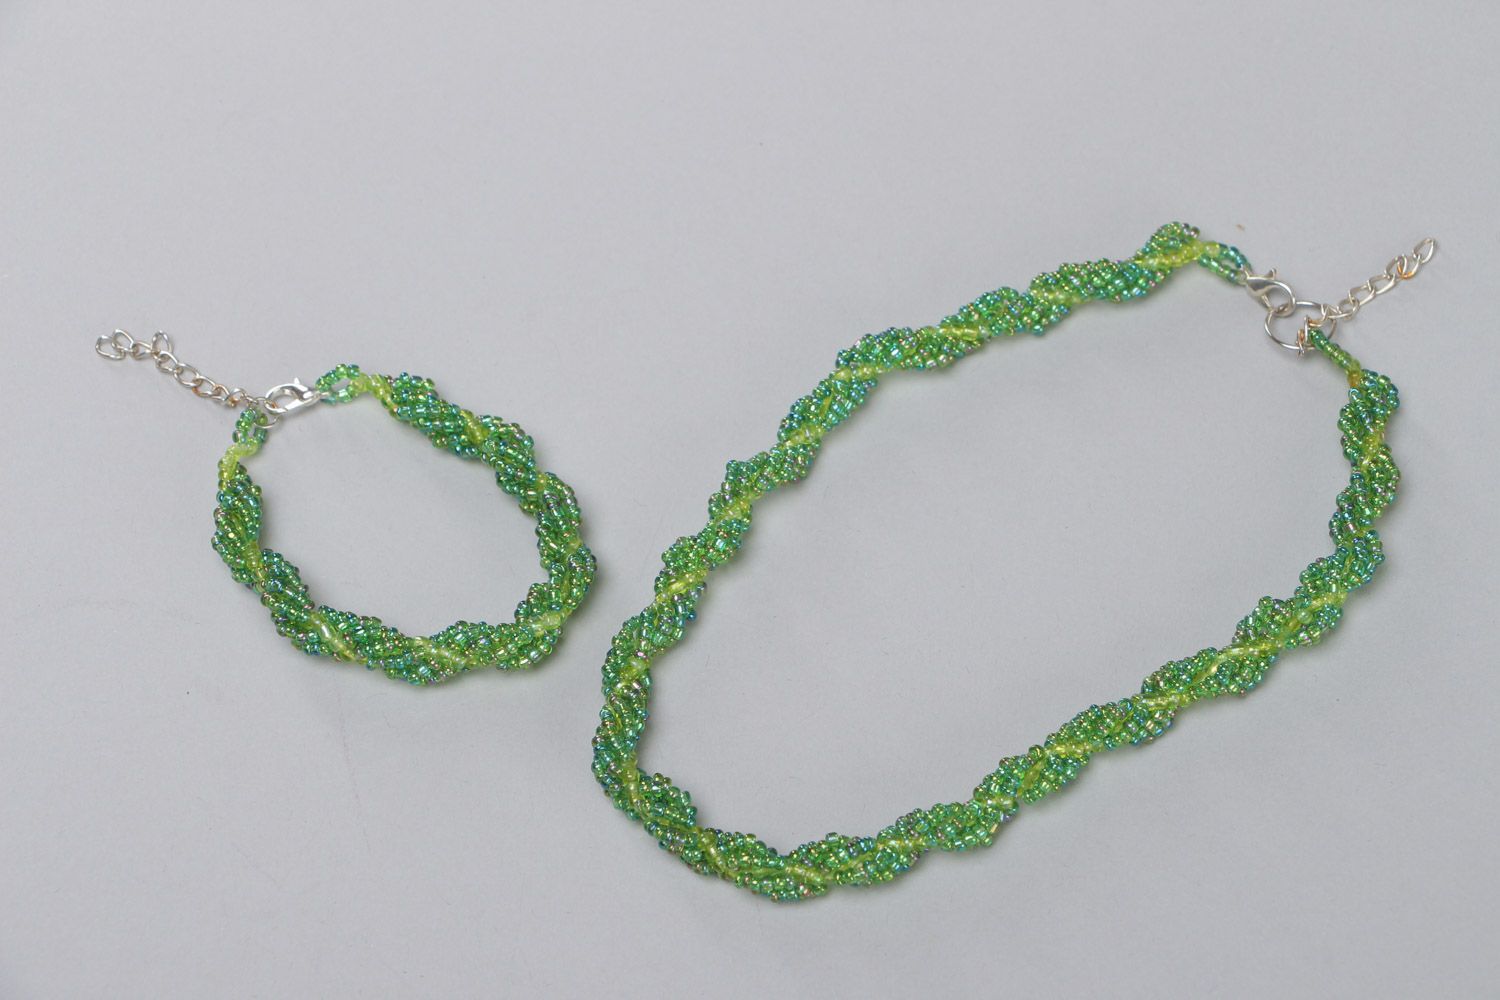 Handmade green woven beaded jewelry set 2 items bracelet and necklace photo 2